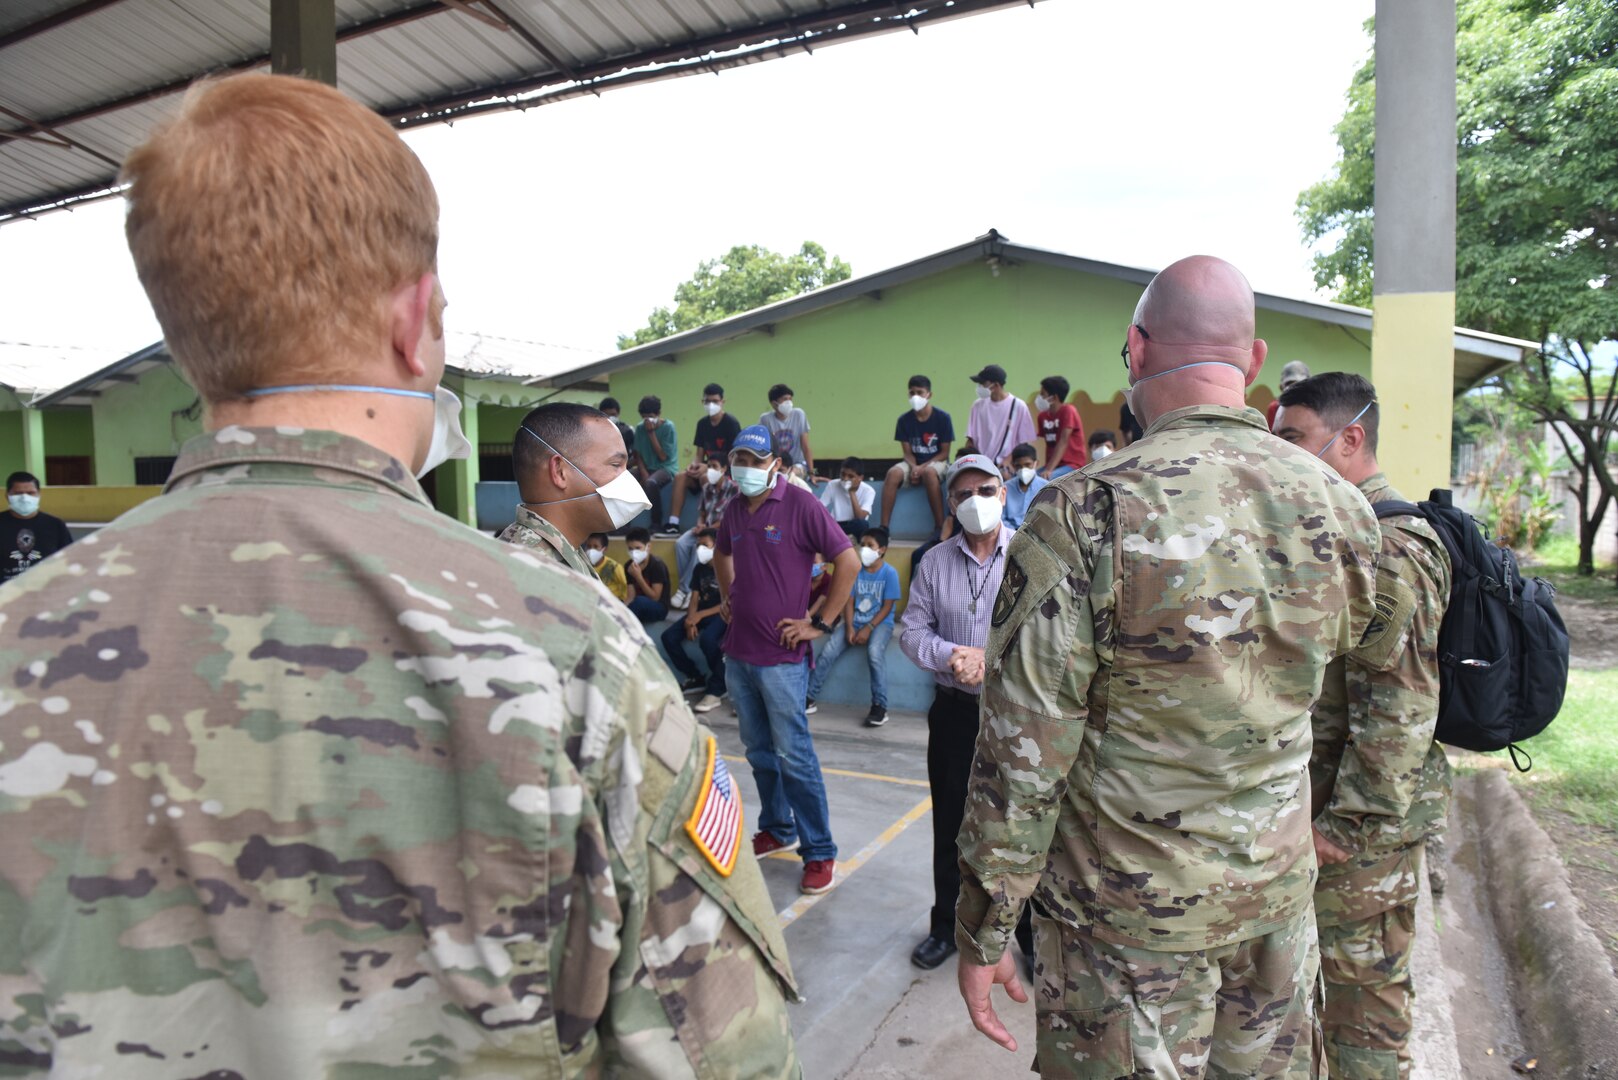 U.S. Army Capt. Joseph Sierra, Joint Task Force-Bravo Headquarters Support Company (HSC) commander, speaks to Father Gregorio about the needs of the Horizontes al Futuro Orphanage in Comayagua, Honduras, Sept. 5, 2020. The HSC sponsors the orphanage, periodically bringing in volunteers to spend recreational time with the children as well as contributing donations. The team took special care to observe strict COVID-19 protocols while conducting the visit for the safety of all involved.